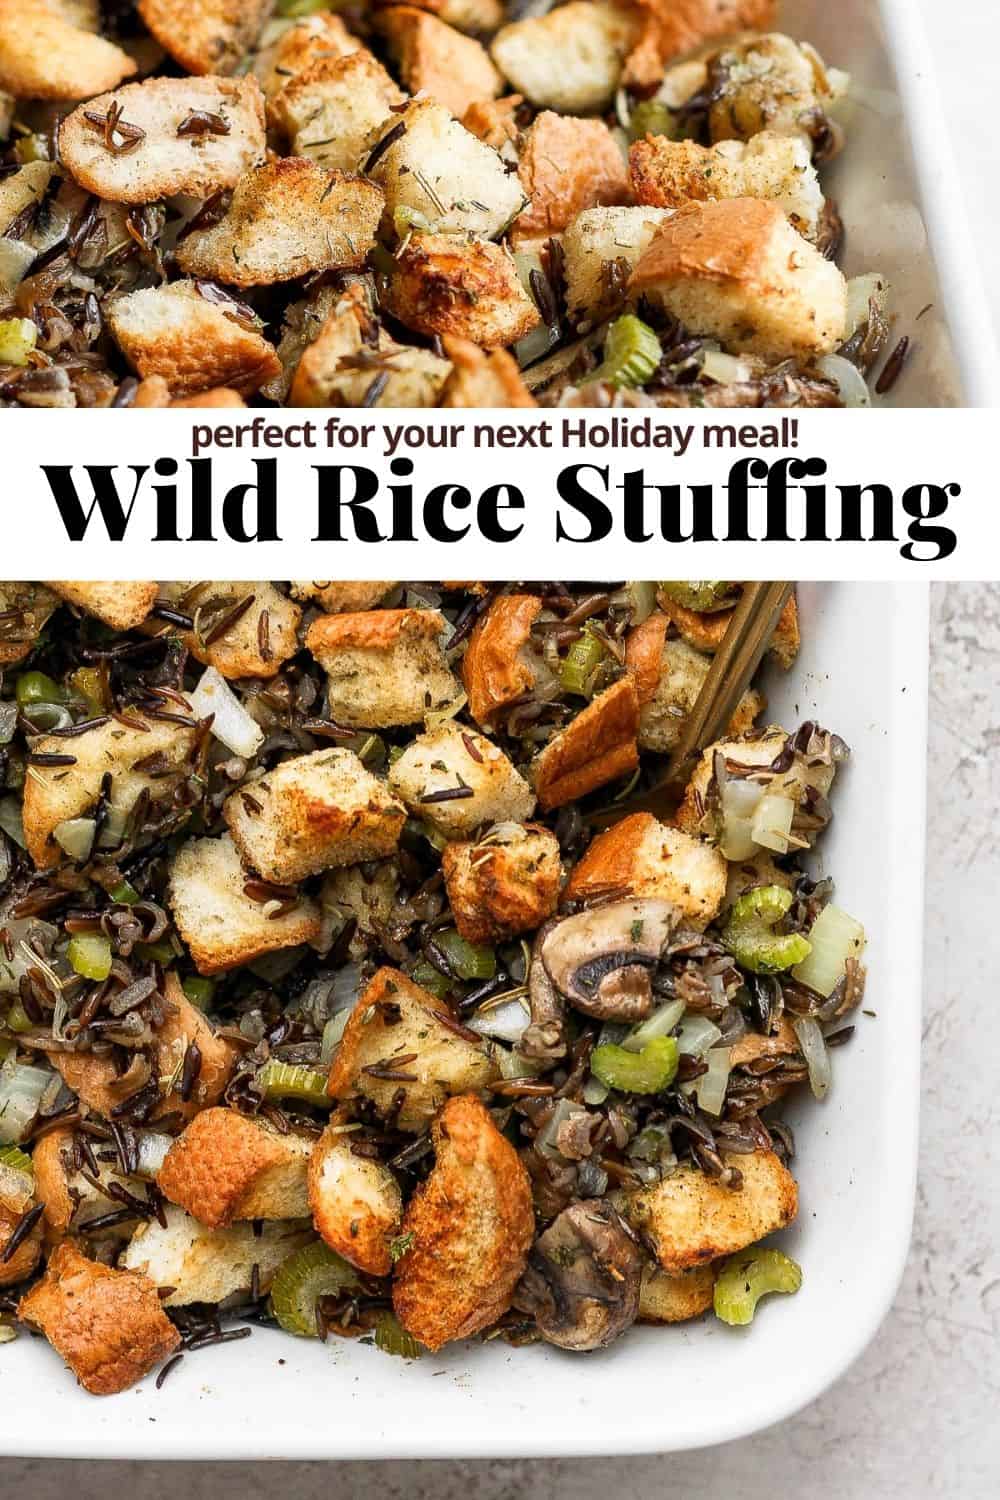 Pinterest image for wild rice stuffing.